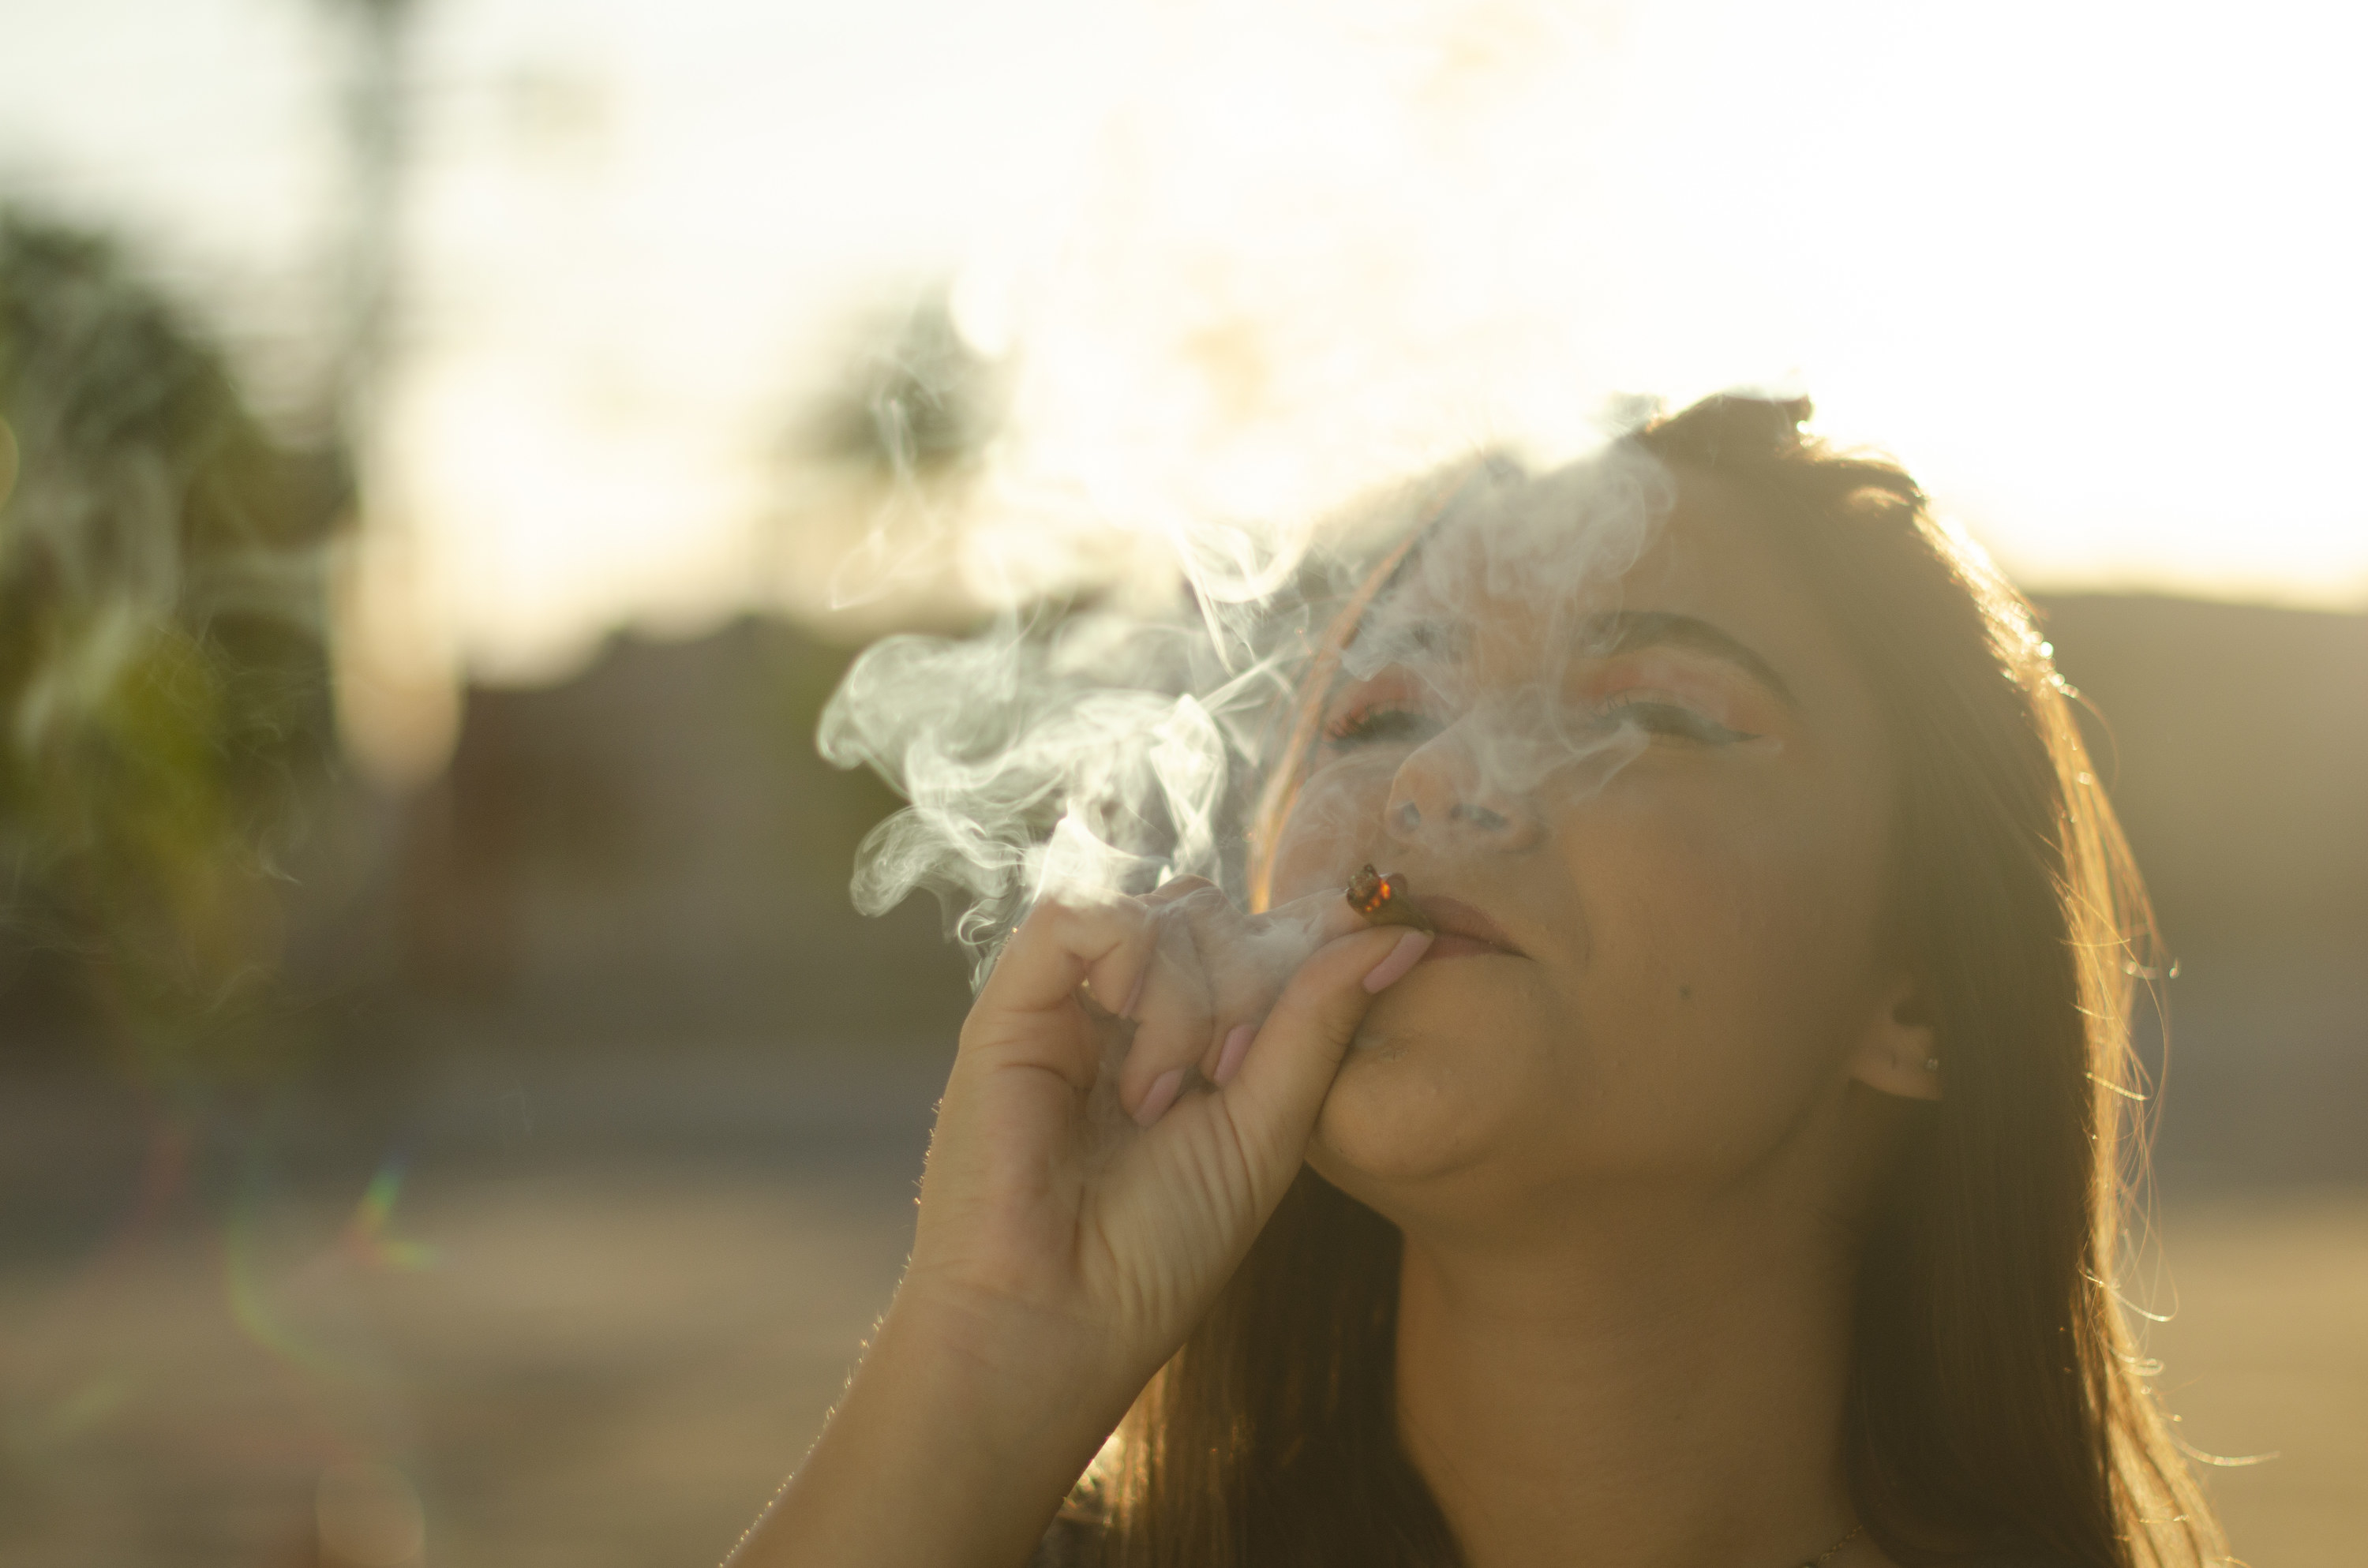 An image of a woman smoking weed